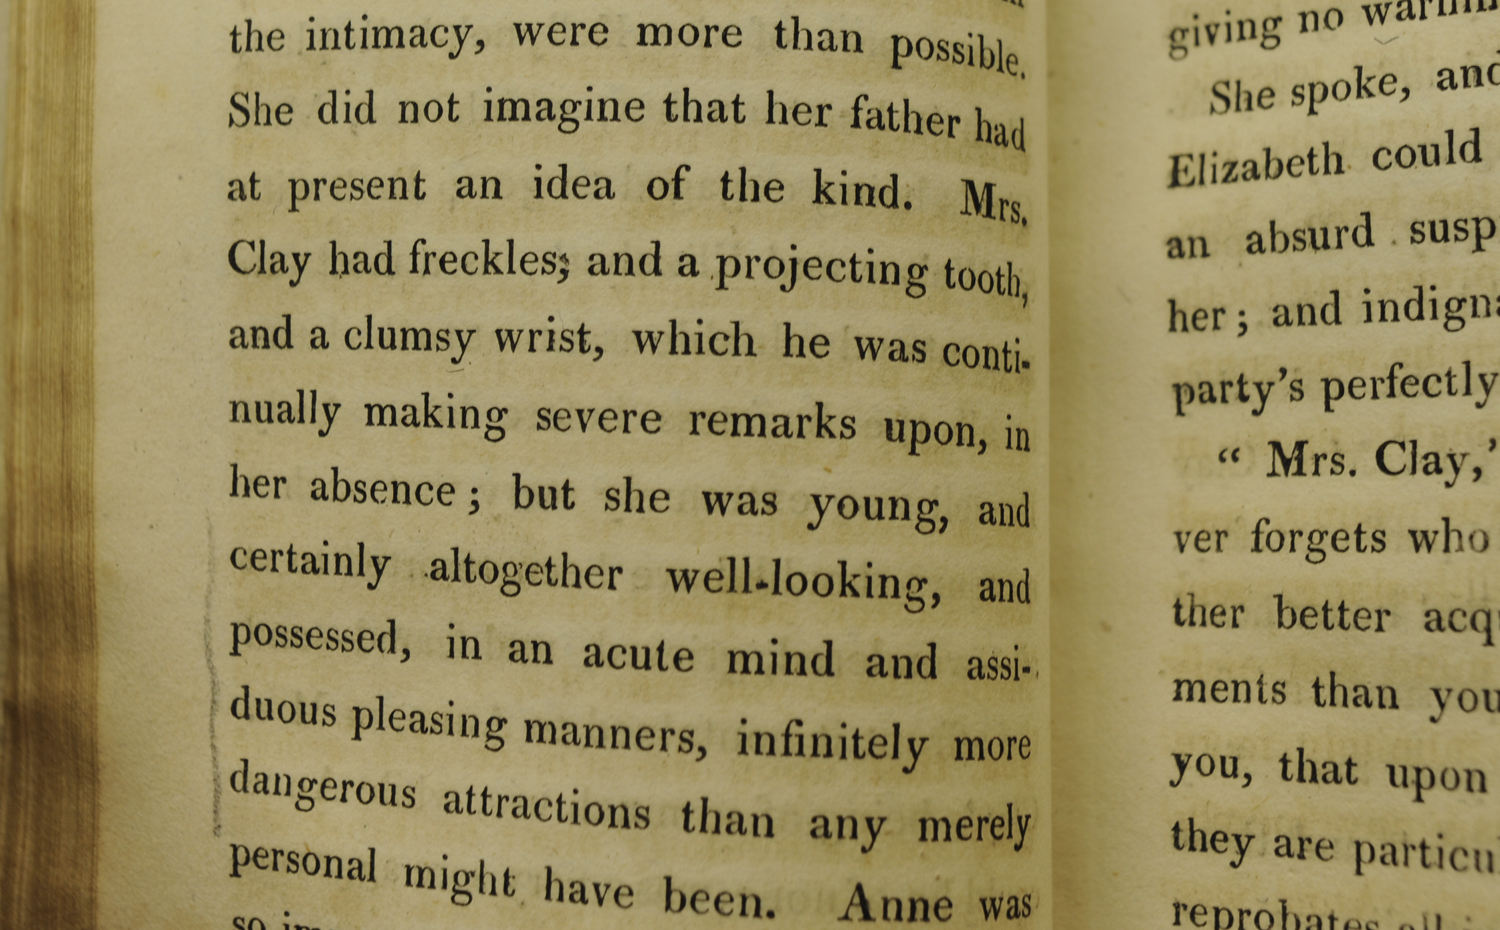 Some biting commentary on the appearance of Sir Walter Elliot’s ‘companion’, Mrs Clay. From St Andrews’ copy of the first edition of Persuasion.